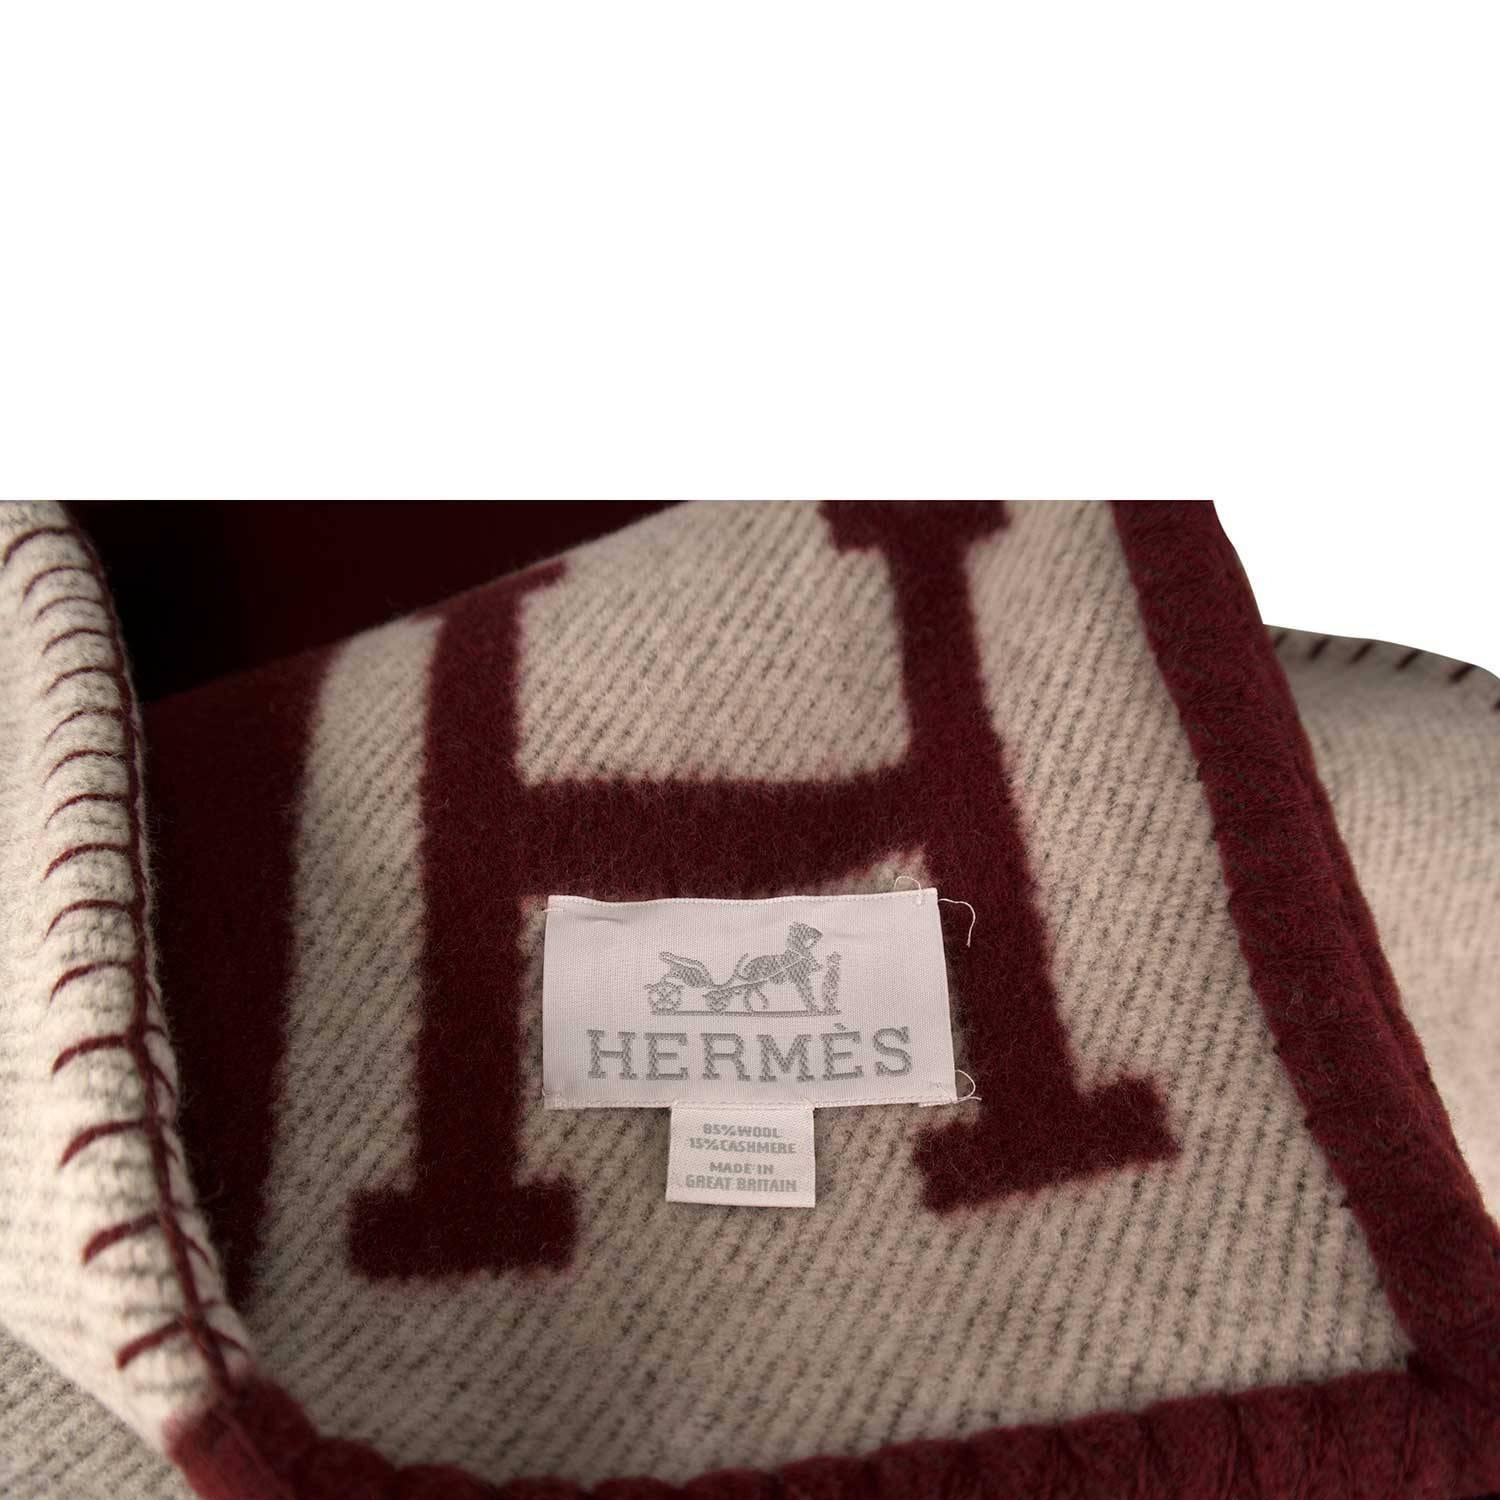 Hermes Avalon Blanket Ecru Rouge H 2016.

Pre-owned and never used.

Bought it in Hermes store in 2016.

Model: Avalon.

Color: Ecru Red H. 

Composition: 85% Laine, 15% Cachemire.

Dimension: 135cm width x 165cm large.

Details:

